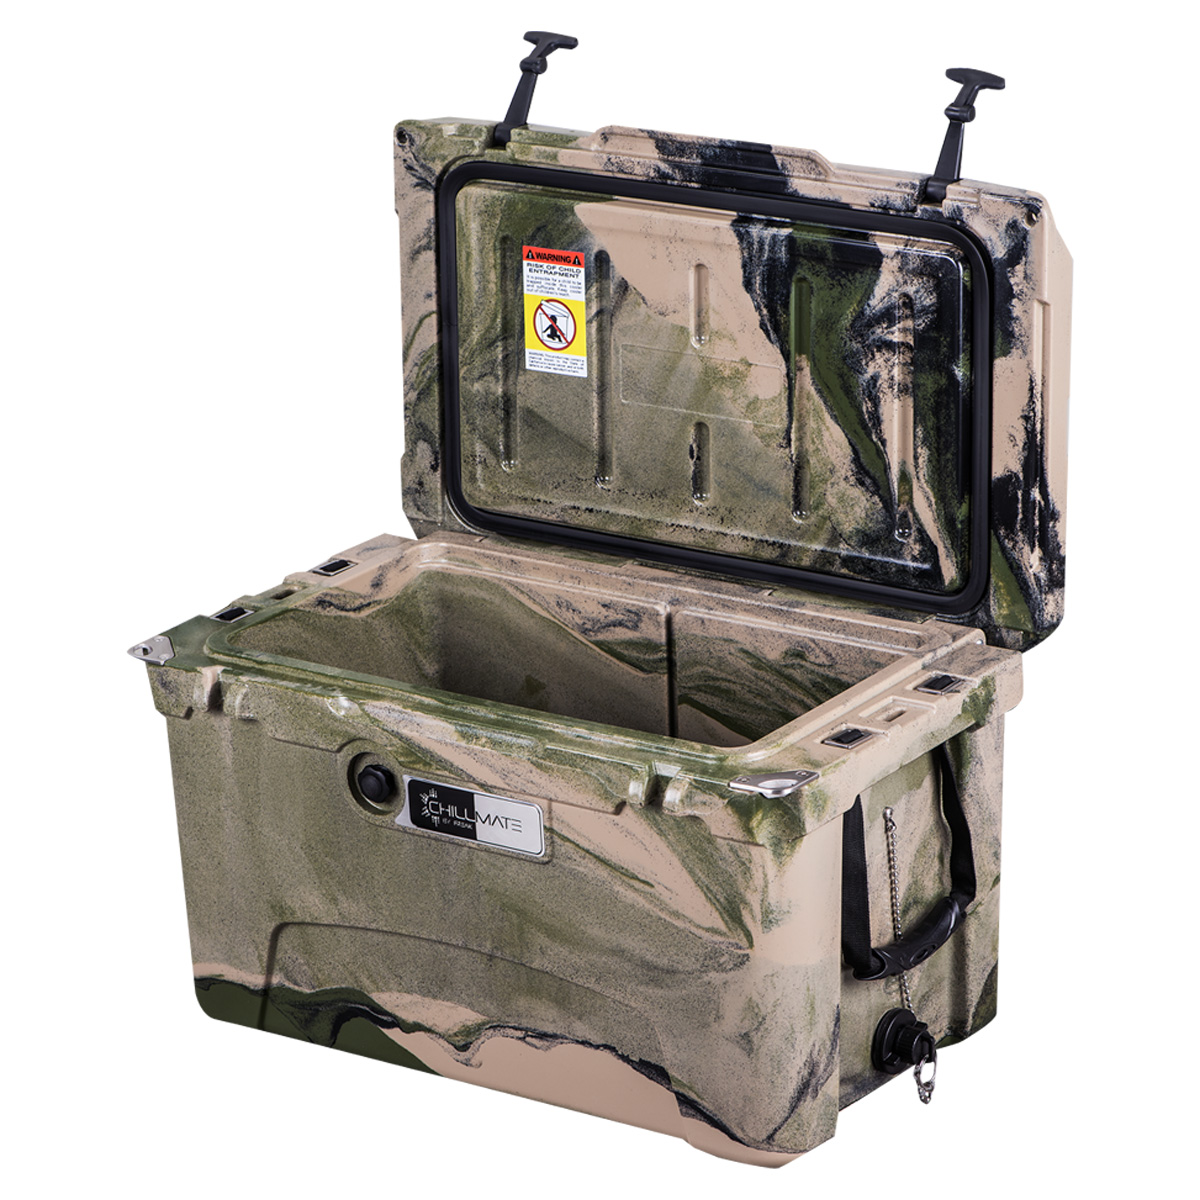 ChillMate 45 Cooler Box Army Camo Icebox For Fishing and Camping 